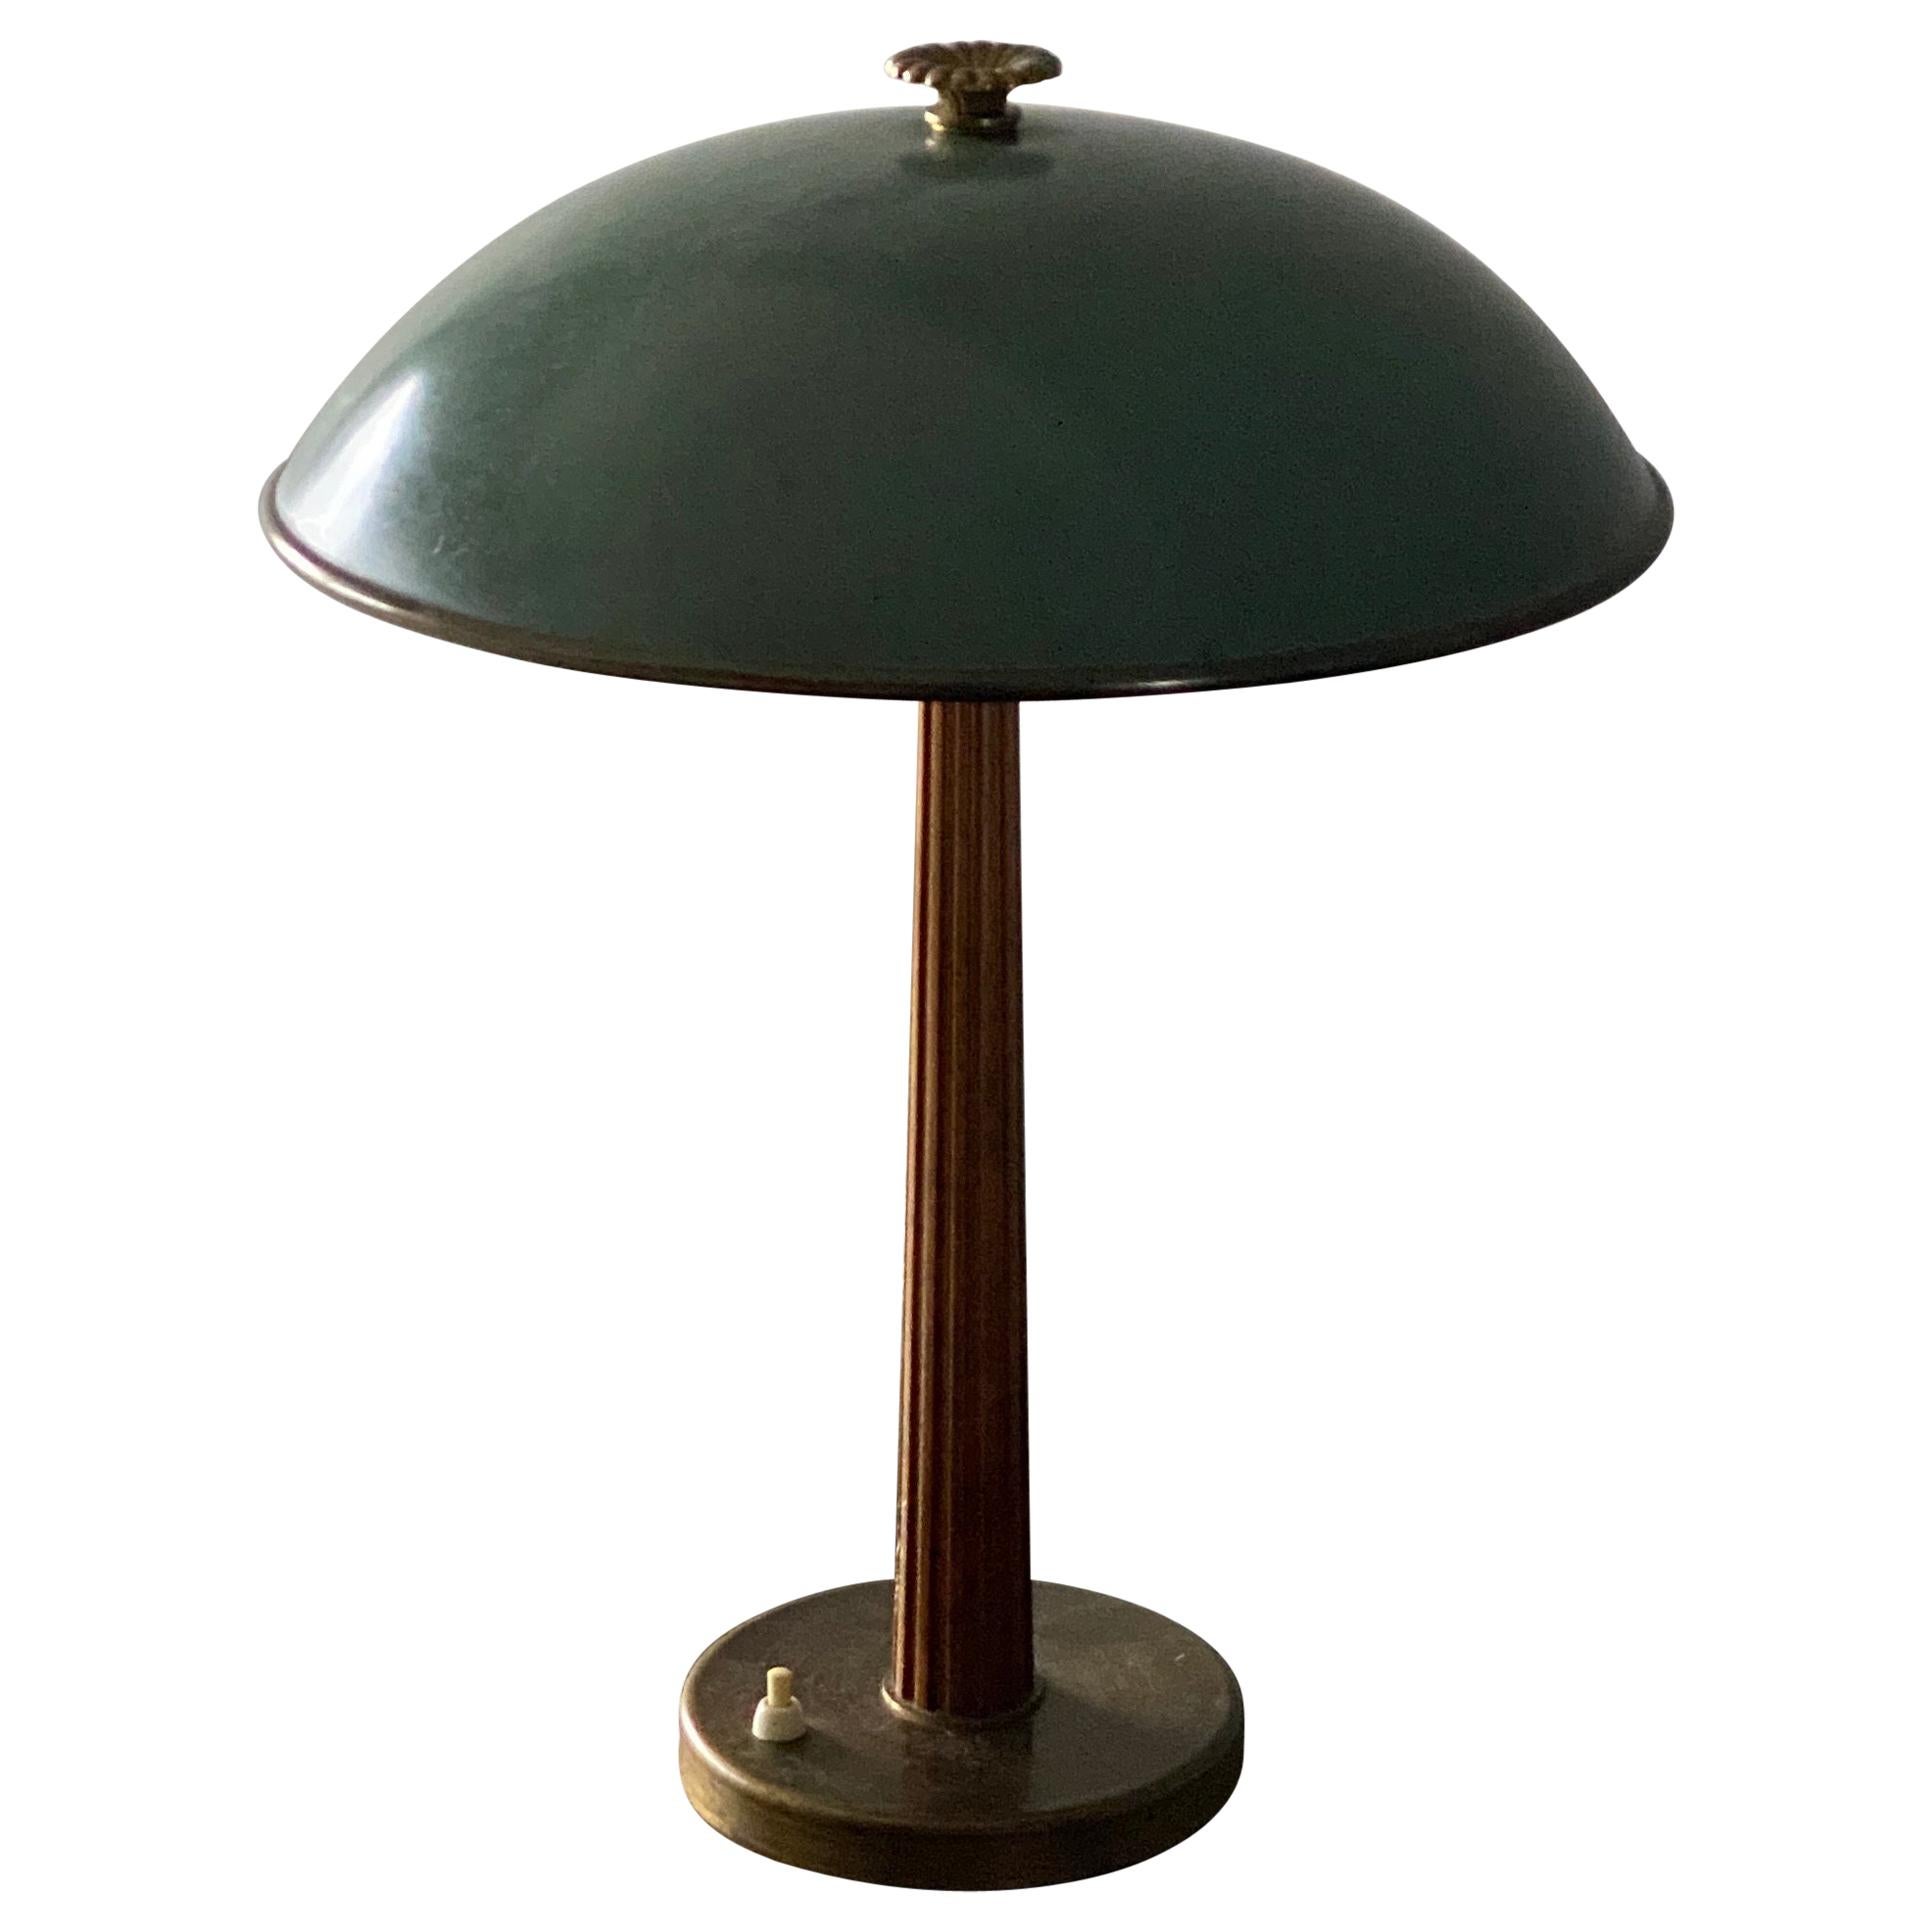 Böhlmarks, Table Lamp Brass, Stained Elm, Torquise Lacquered Steel, circa 1940